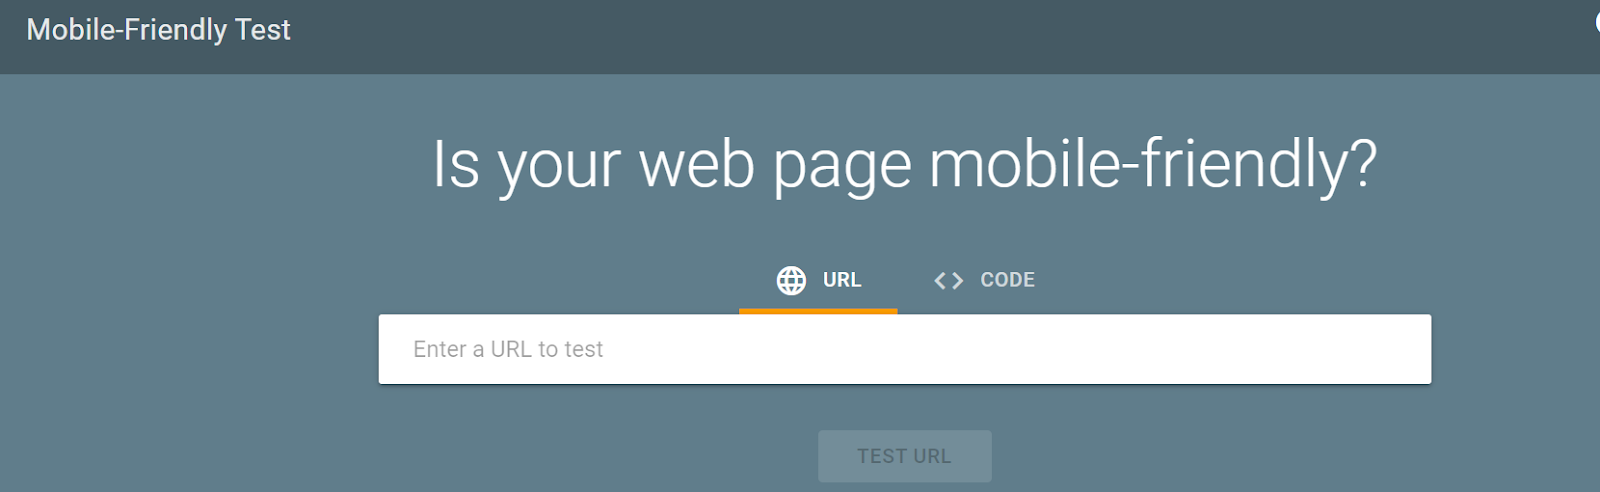 How to test mobile-friendliness using Google mobile-friendly tool